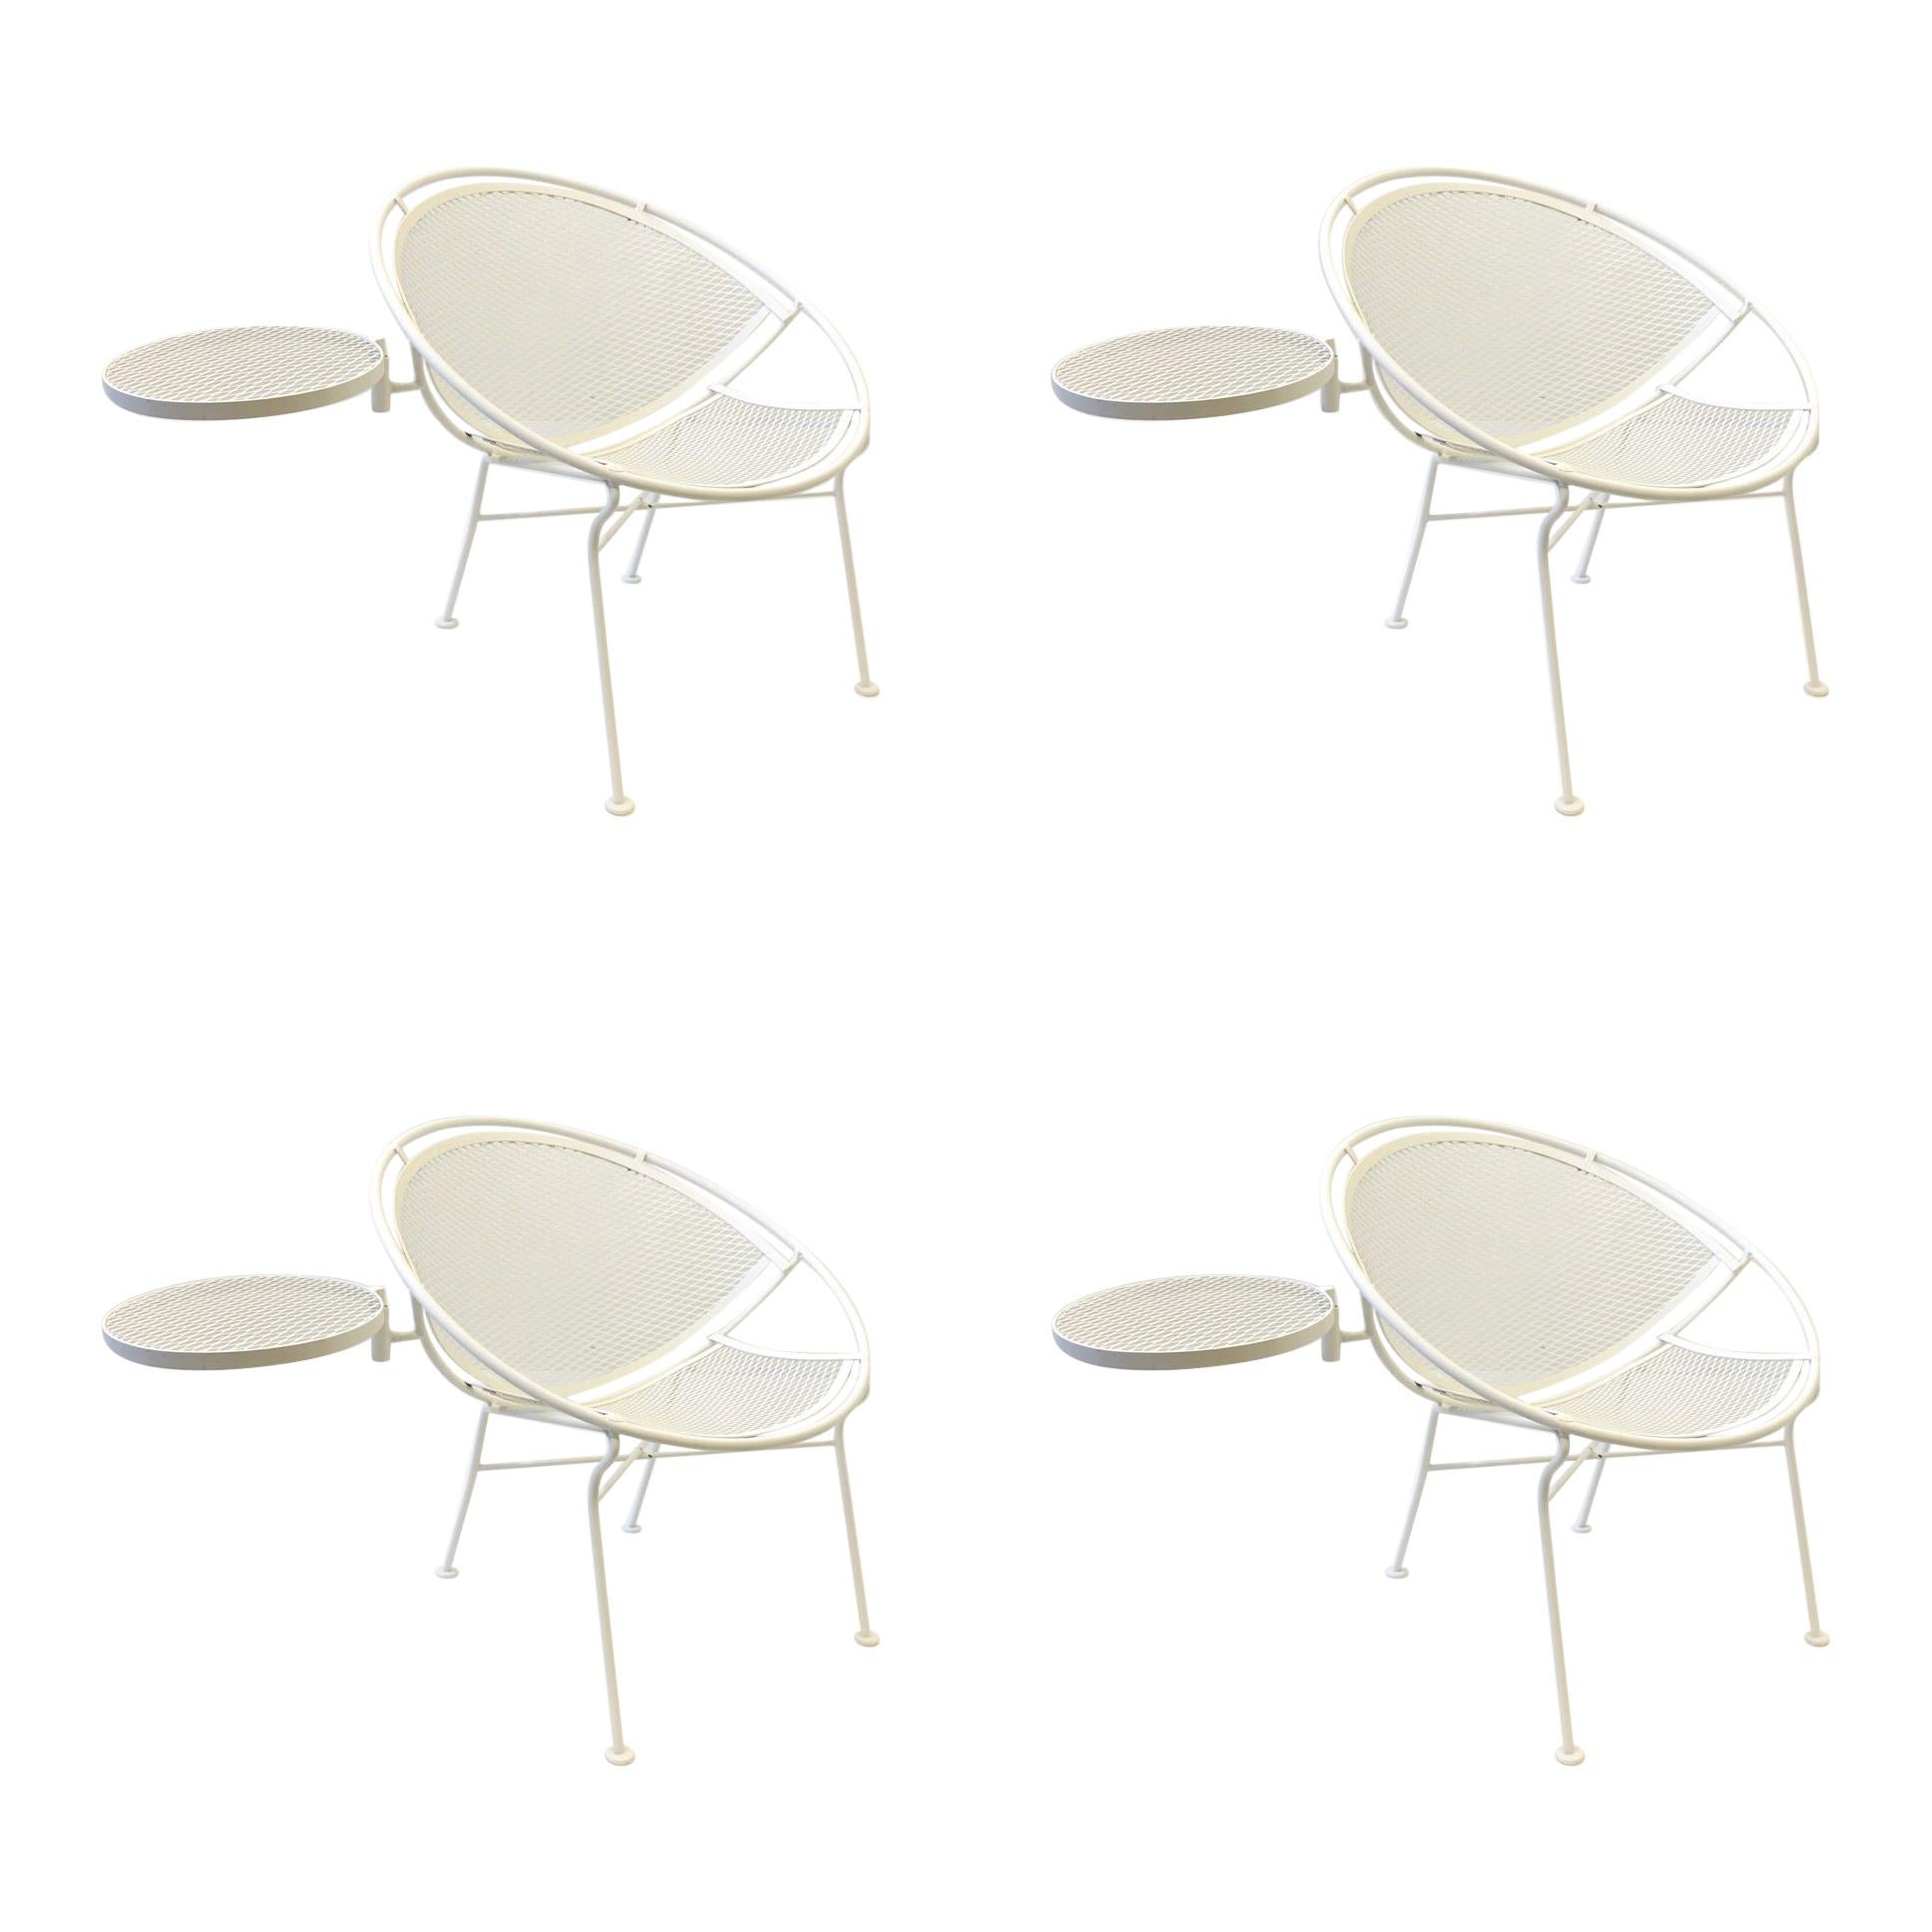 Set of Four White Powder Coated Patio Chairs by Salterini